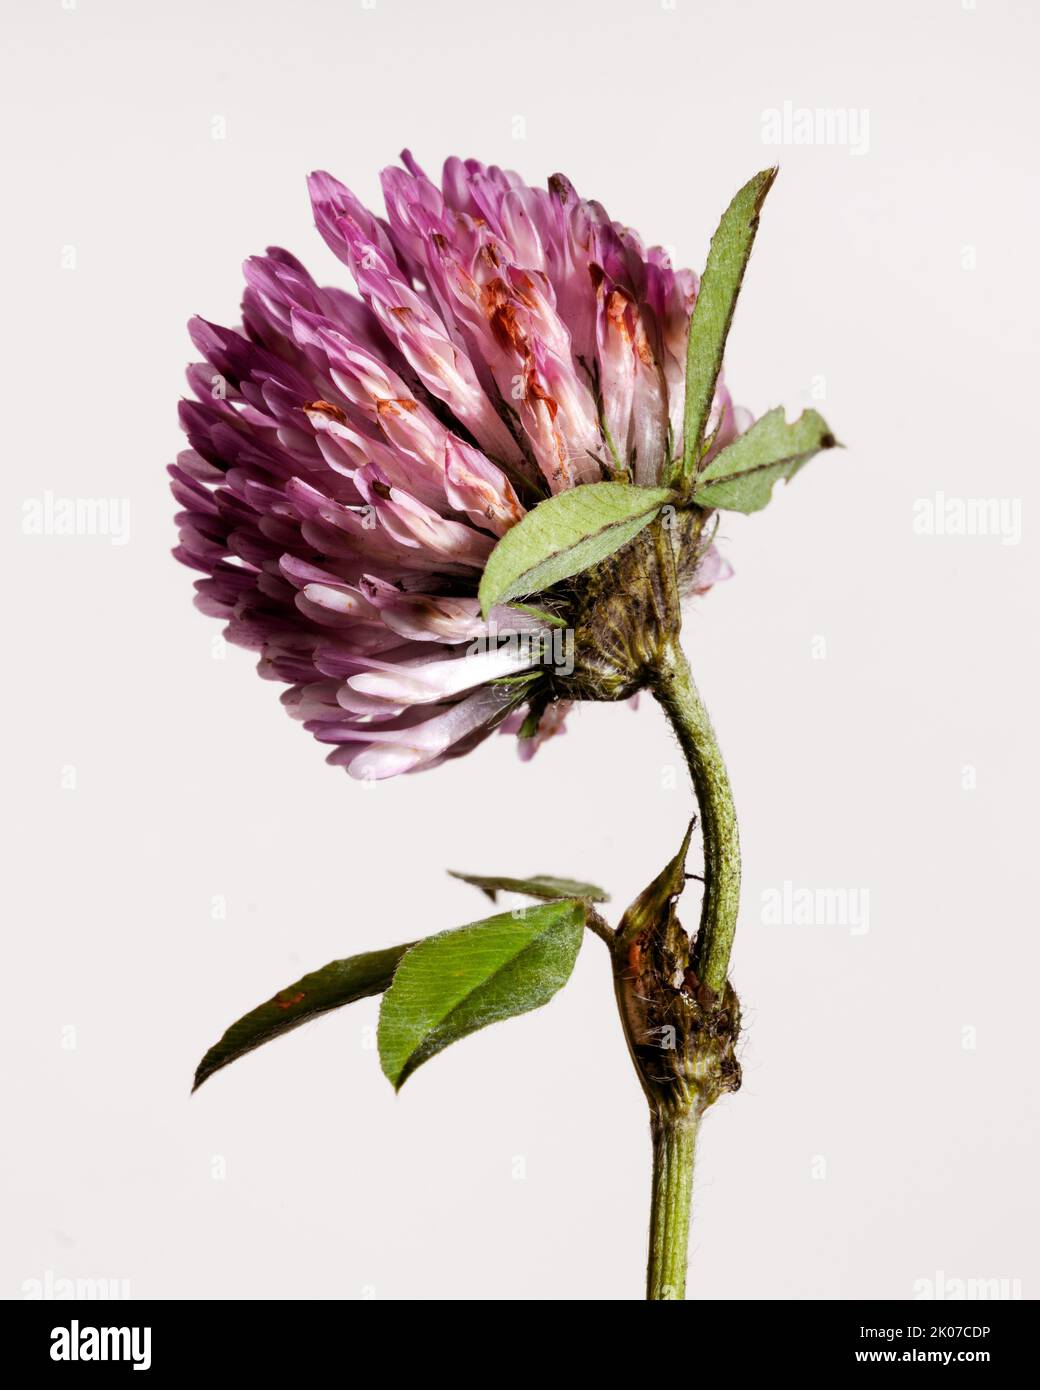 Clover Flower Portrait - Part 2, Withered and Wilted Flower Stock Photo